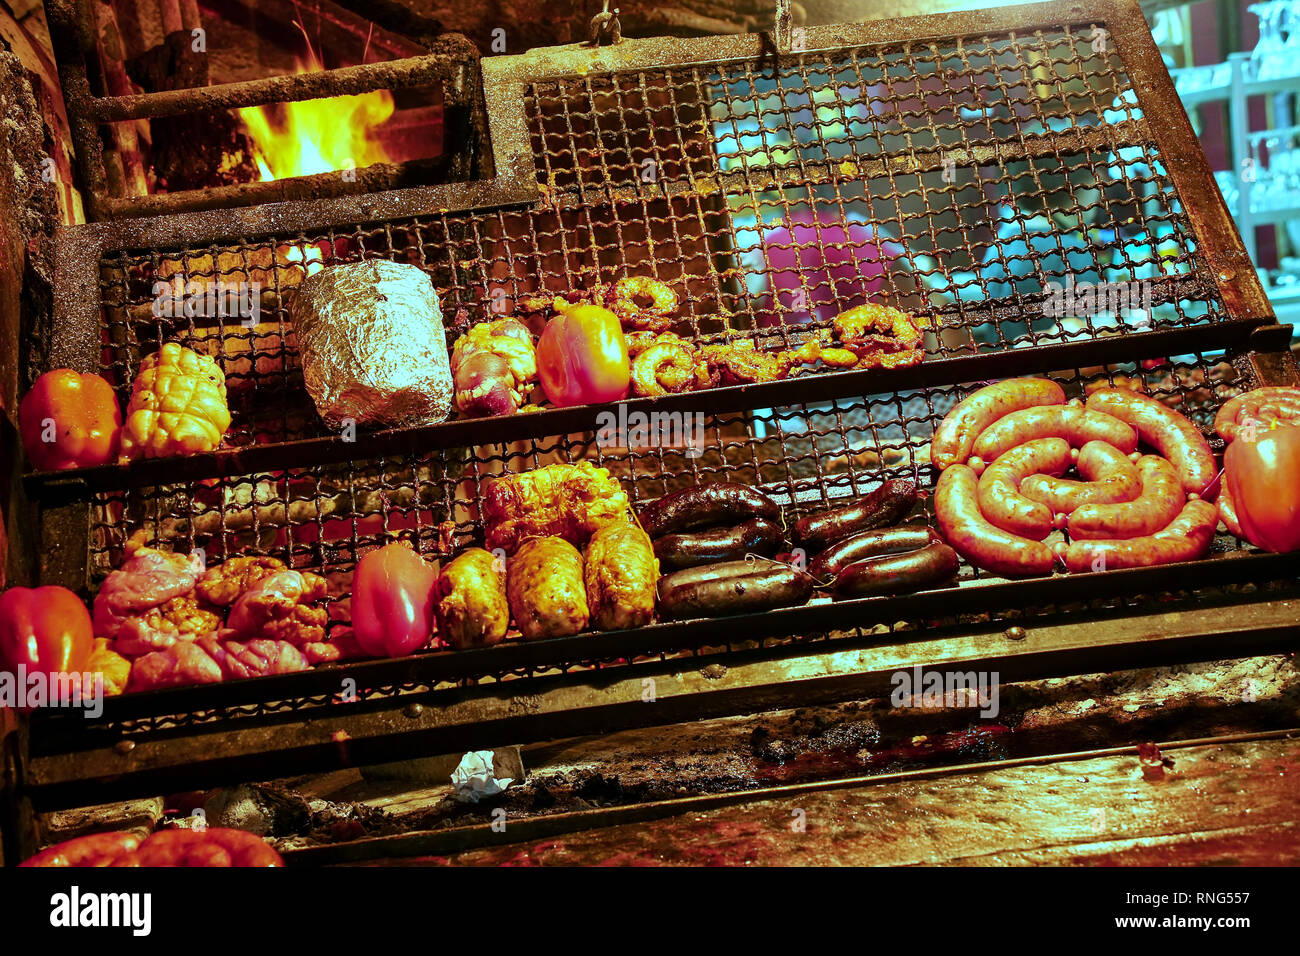 Display of meats in Port Market, Montevideo, Uruguay. It is the most popular place for parillas (barbeque) in the city. Stock Photo